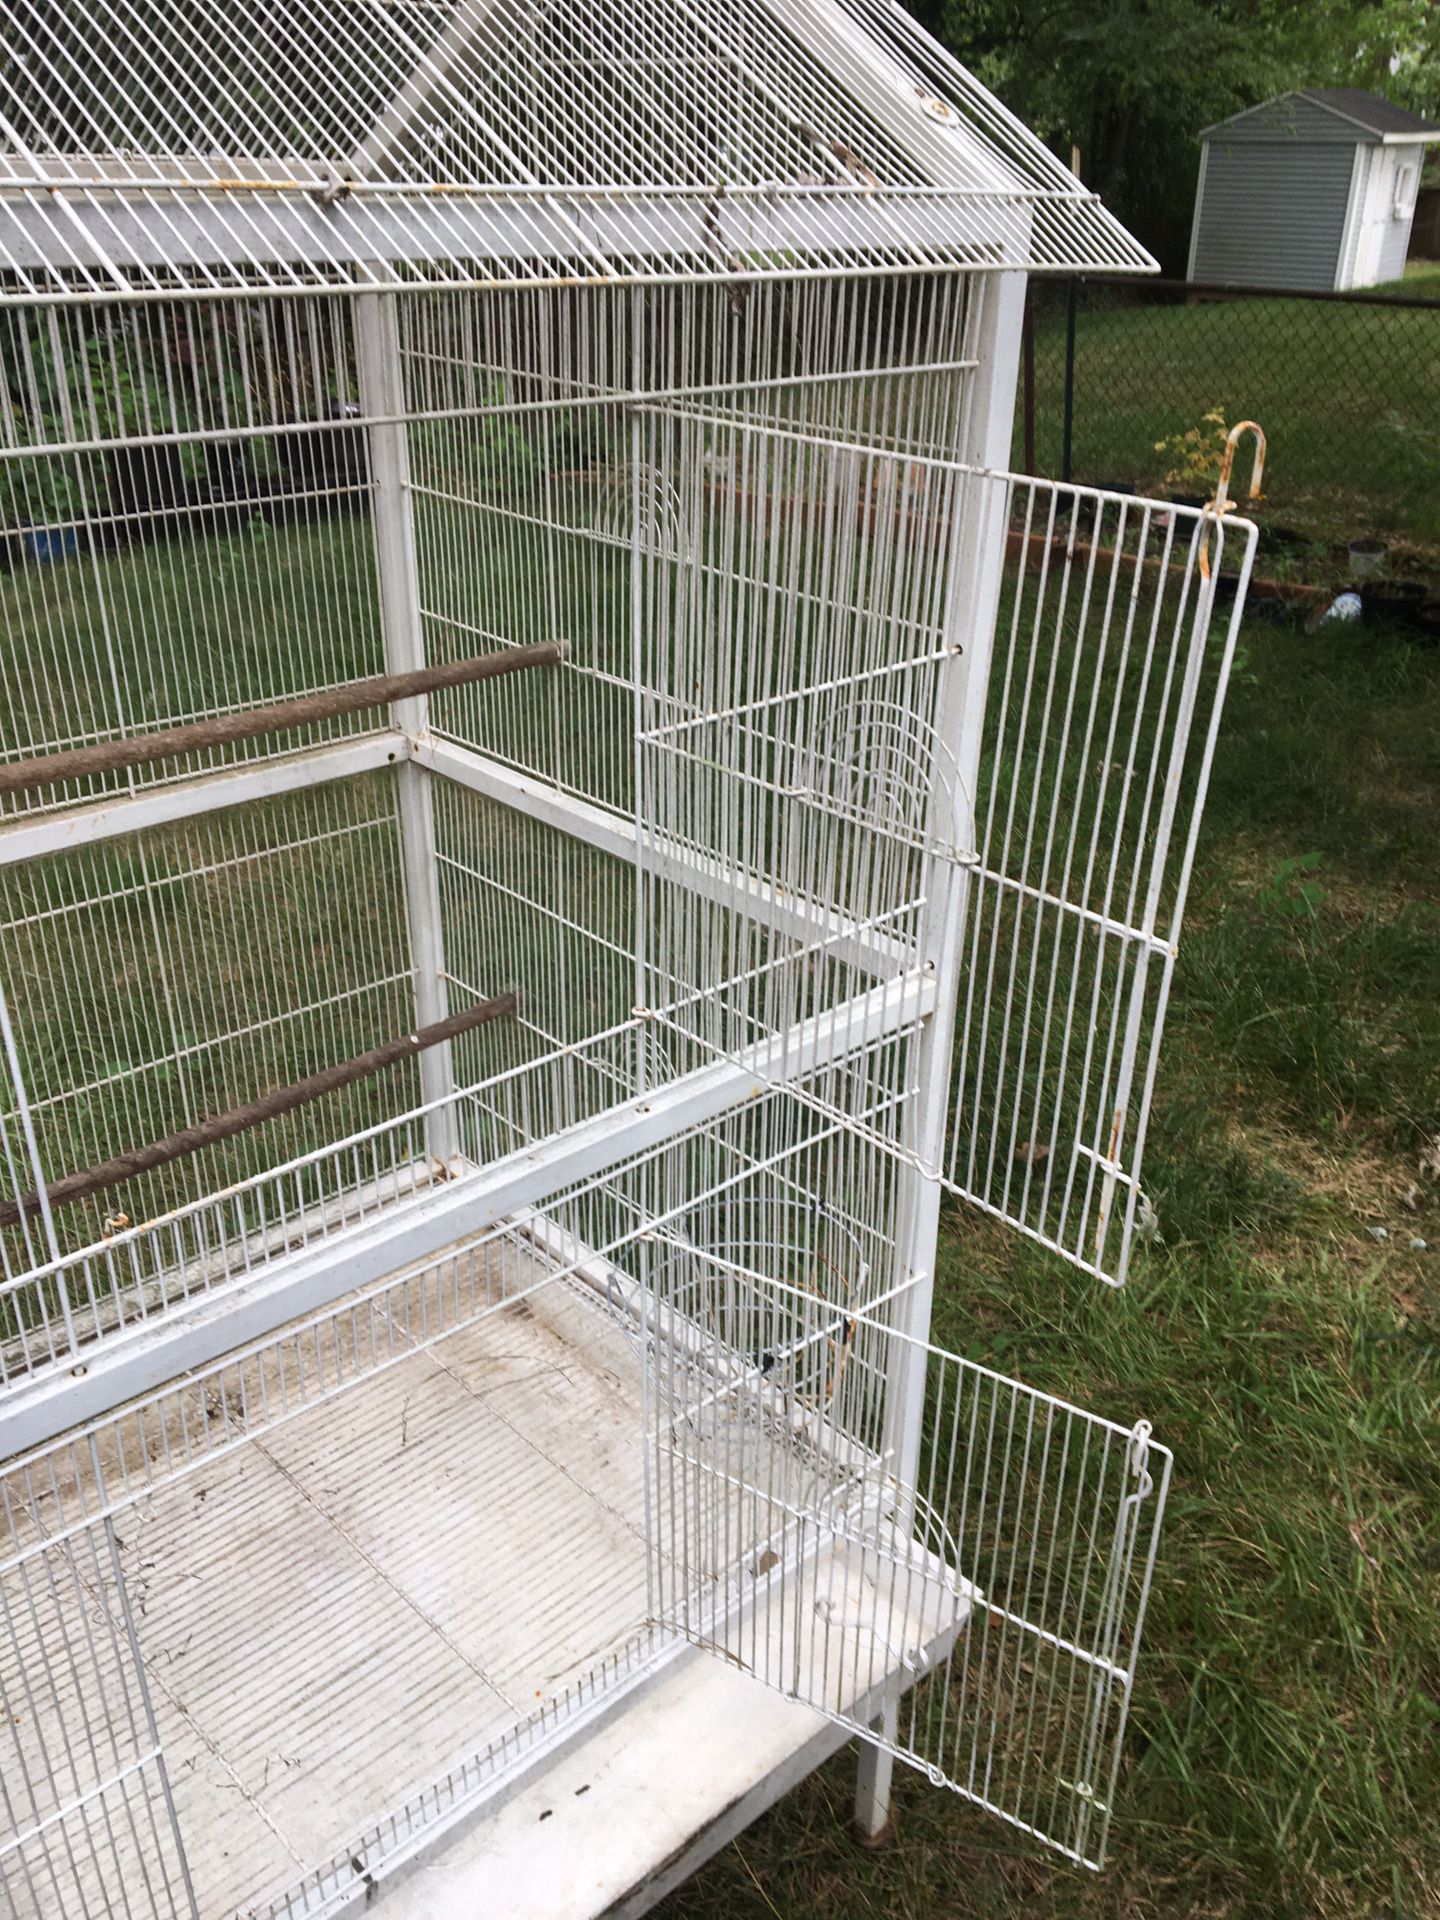 Aviary (bird Cage) Disassembled For Pickup